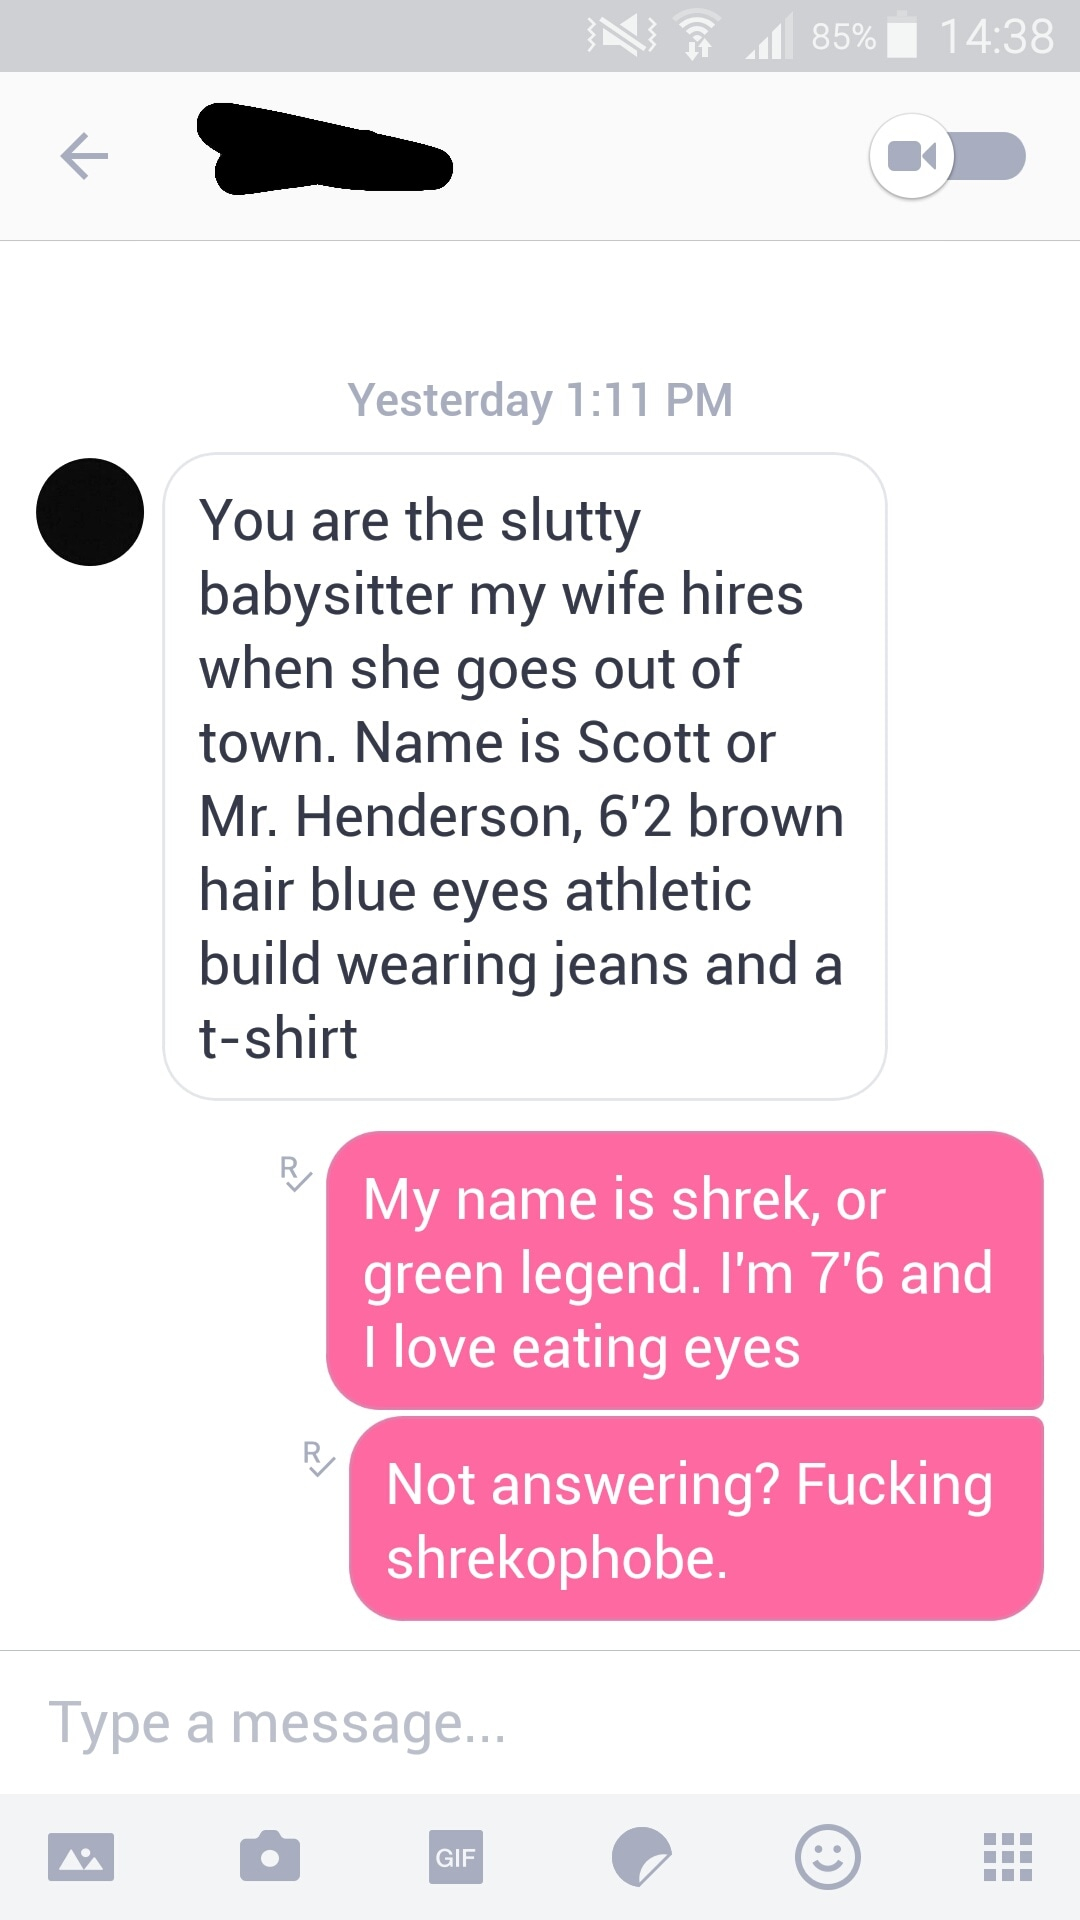 screenshot - N 451, Yesterday You are the slutty babysitter my wife hires when she goes out of town. Name is Scott or Mr. Henderson, 6'2 brown hair blue eyes athletic build wearing jeans and a tshirt My name is shrek, or green legend. I'm 7'6 and I love e